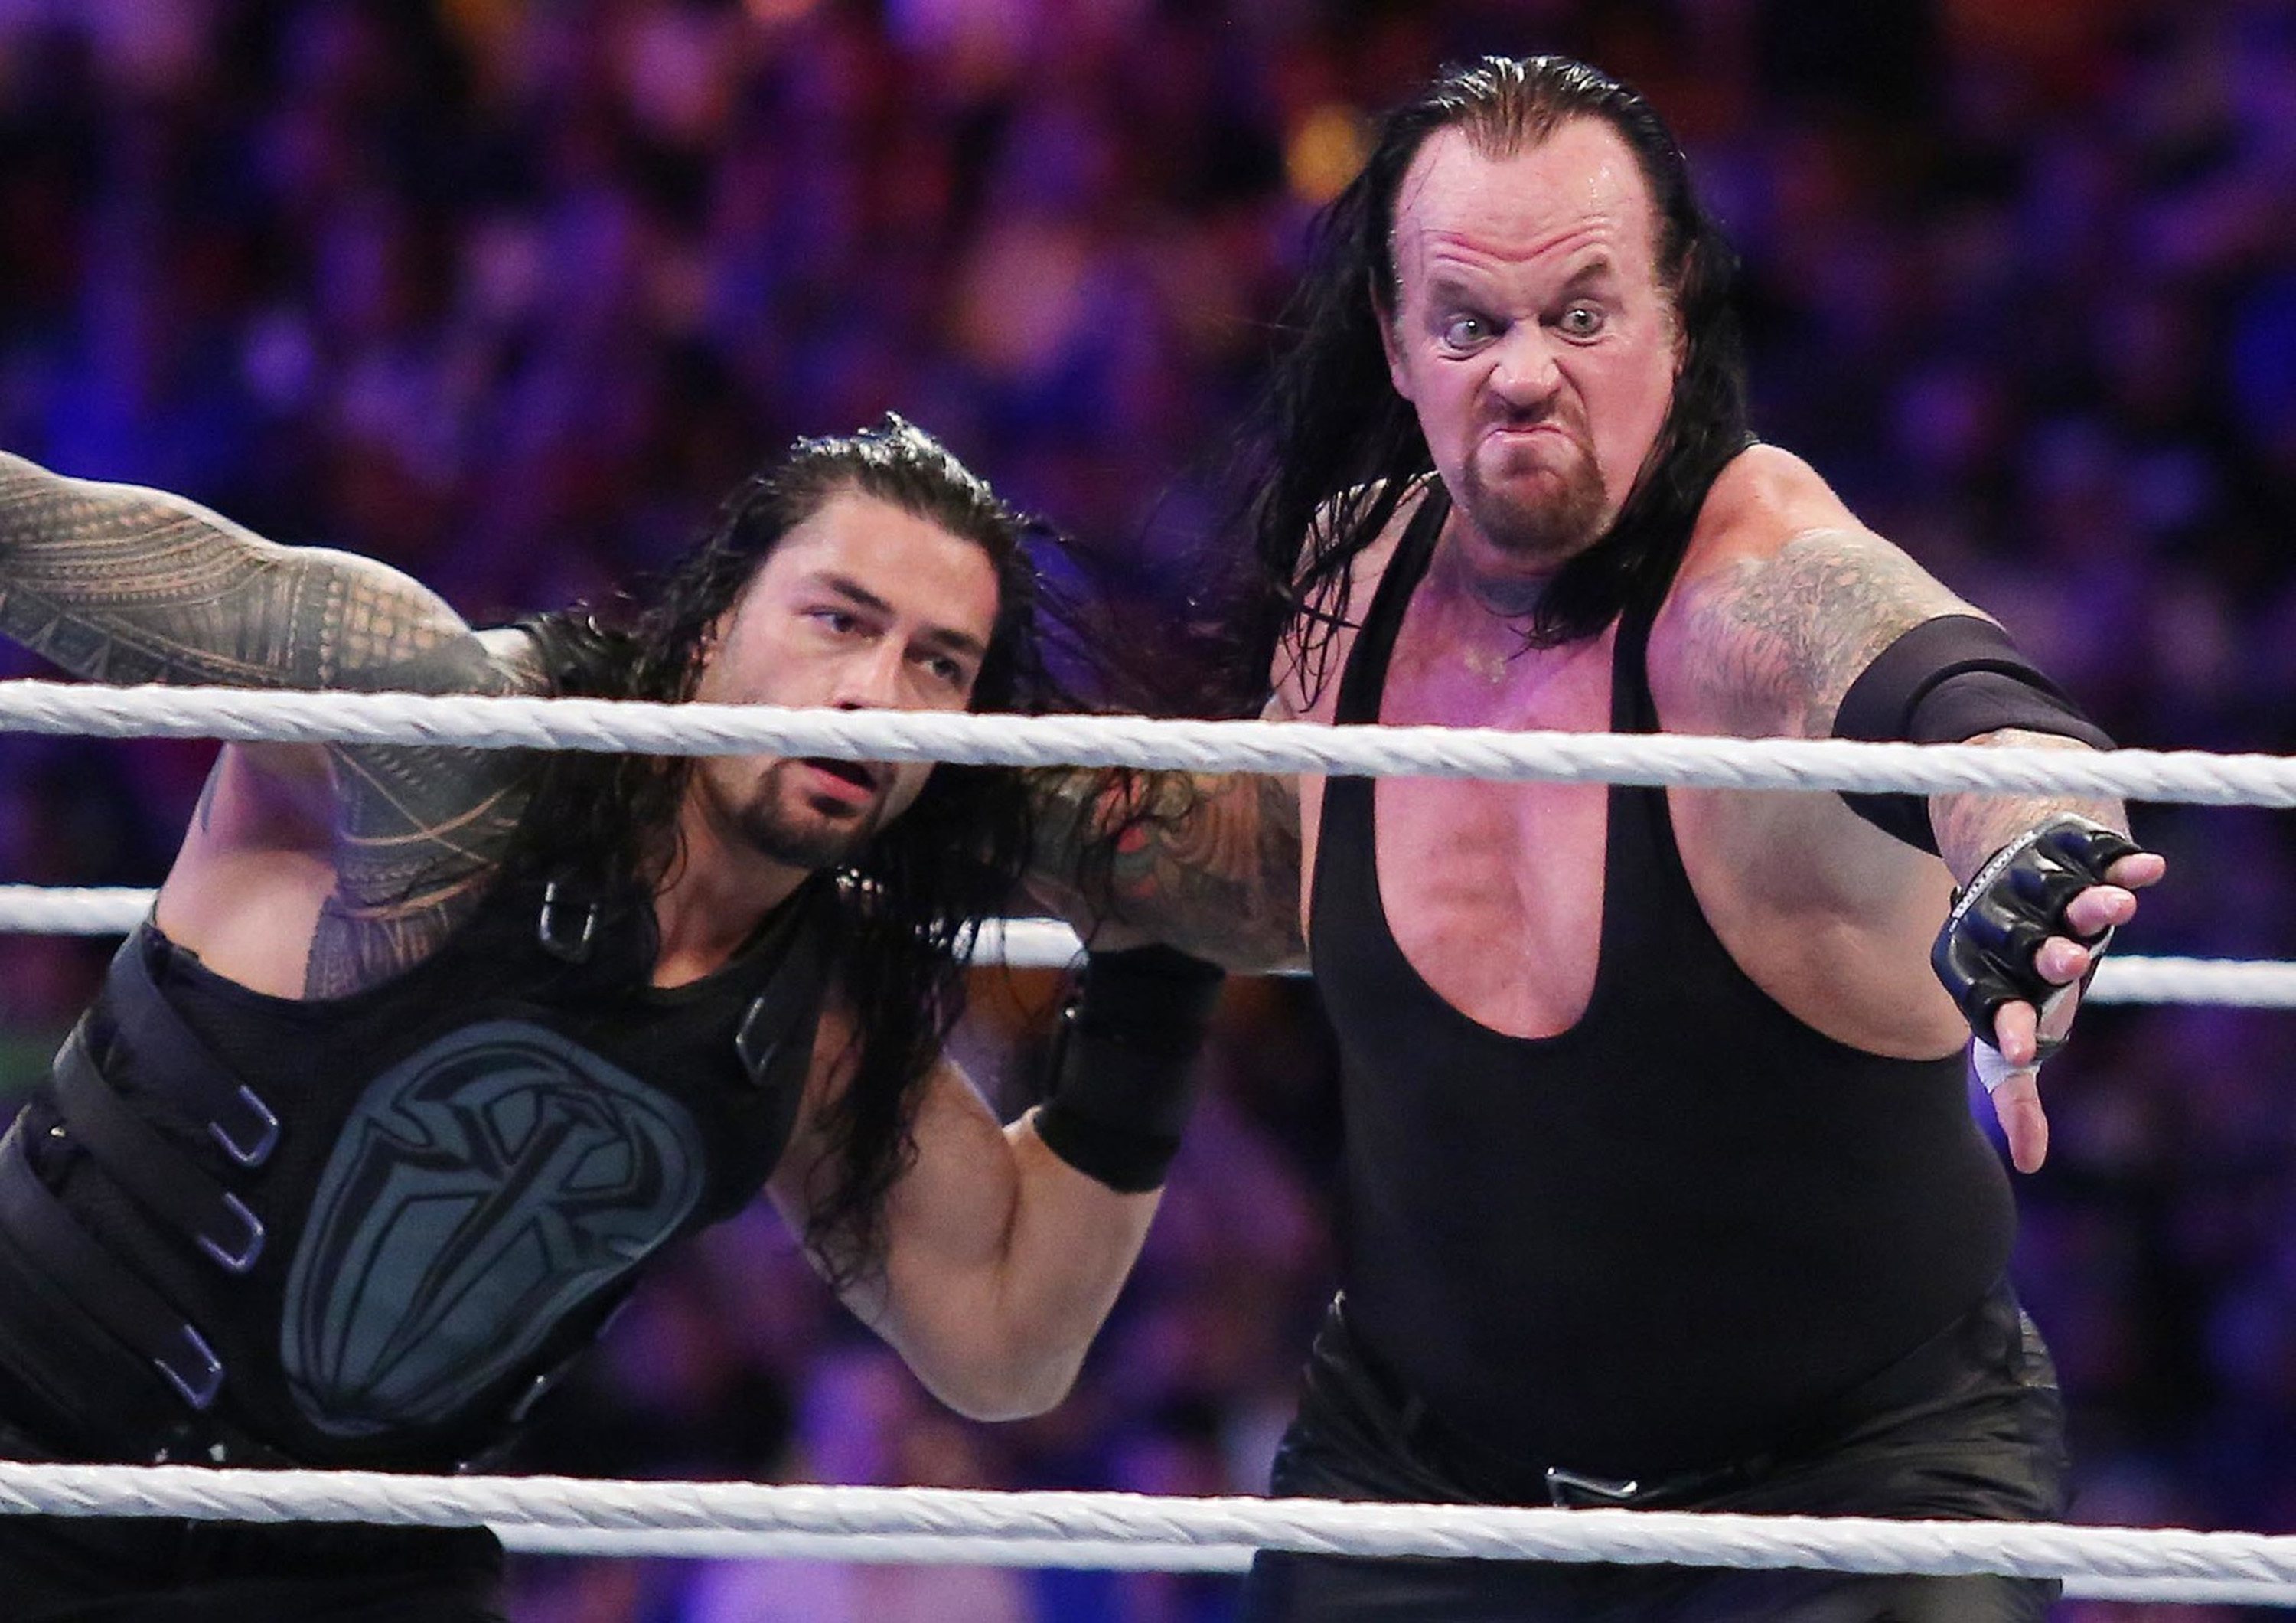 WWEs The Undertaker is coming to Philly for a one-man show at The TLA in October